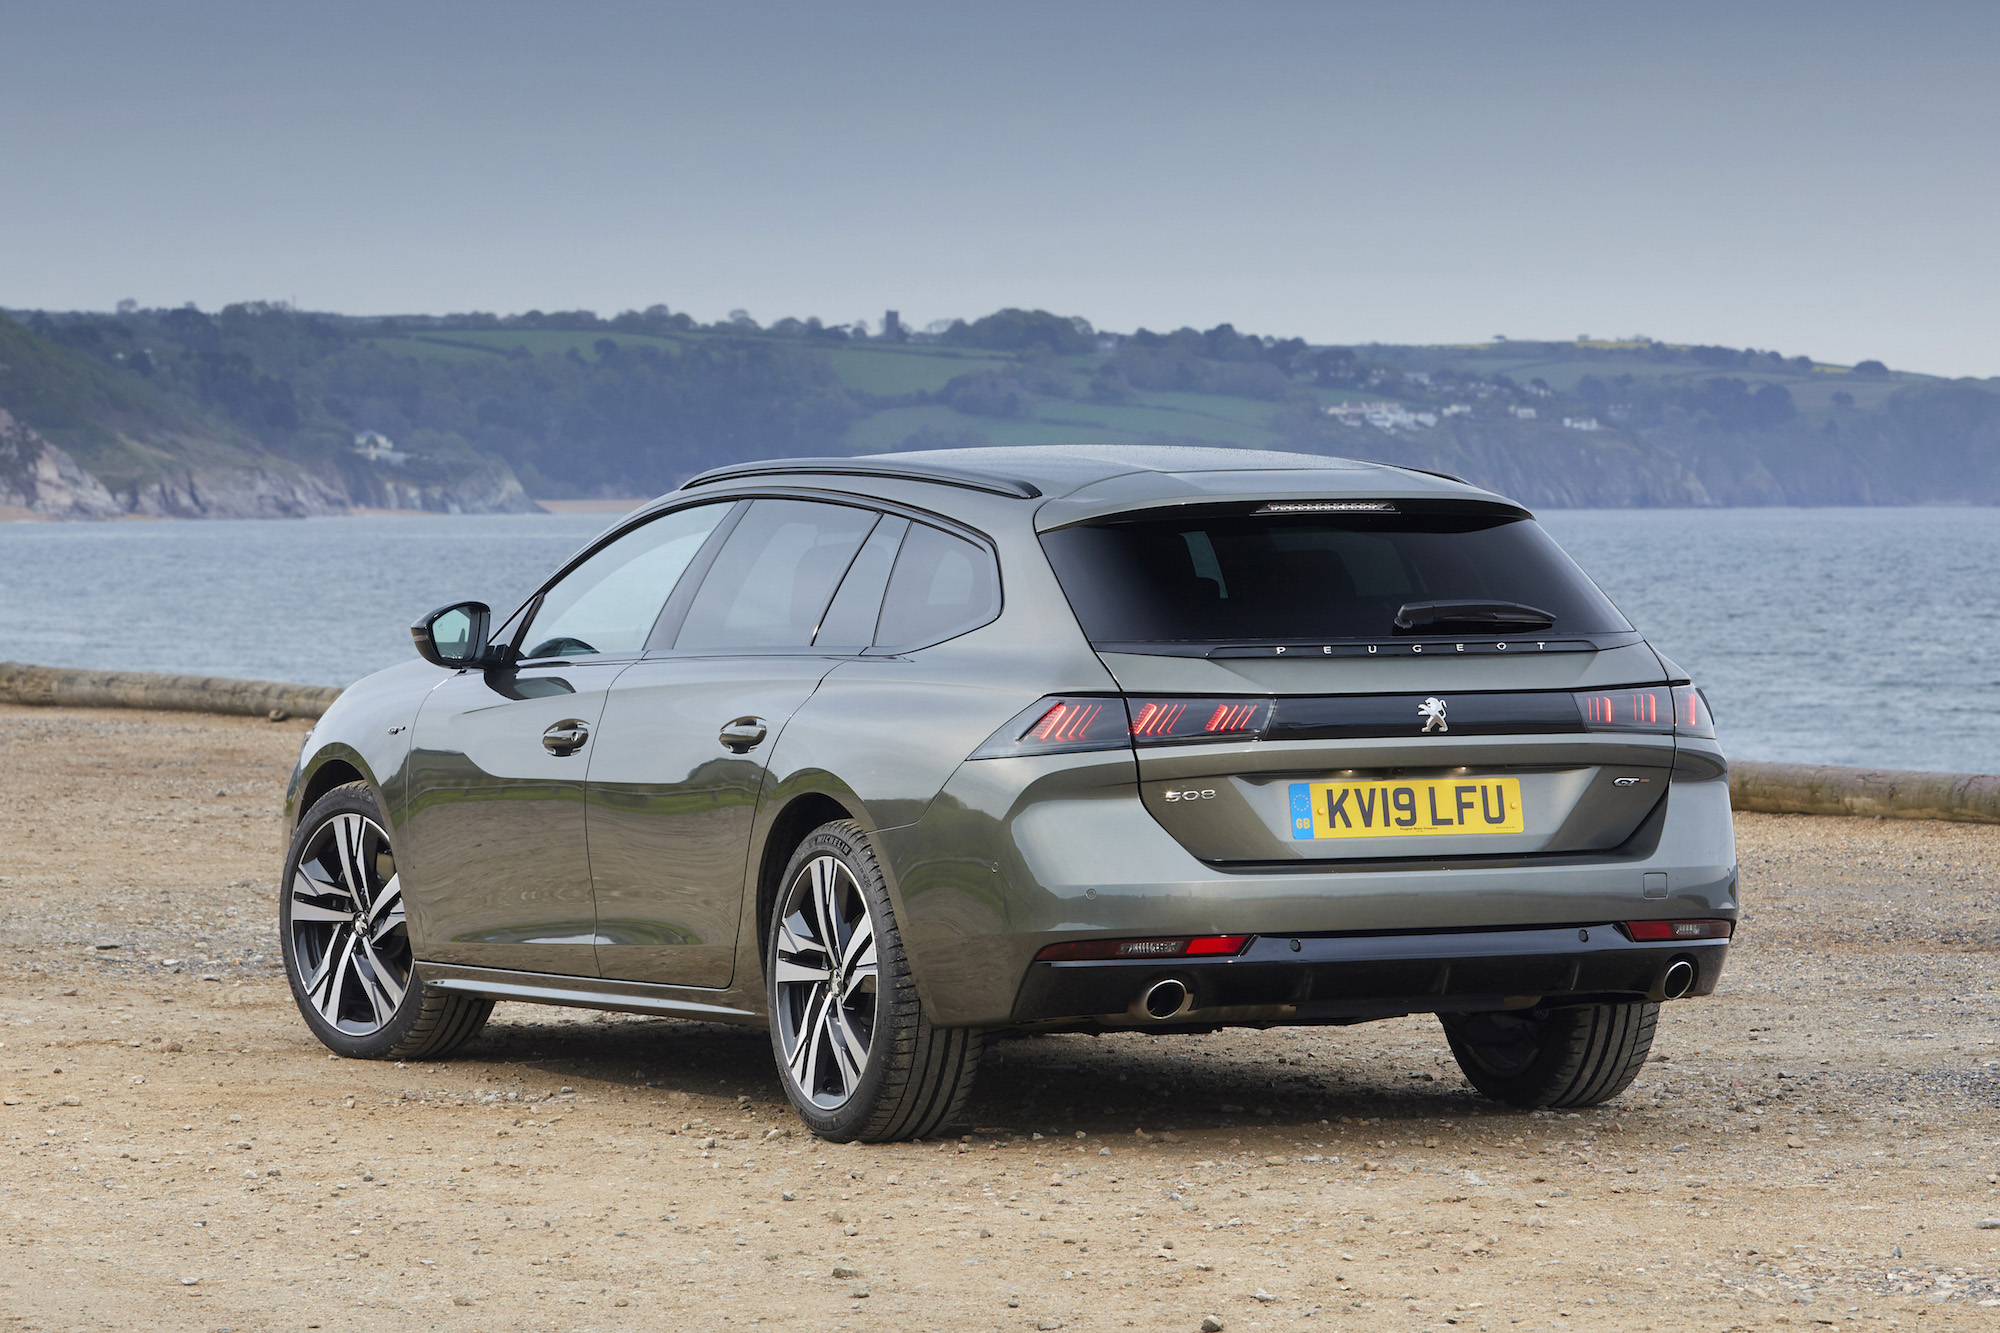 pricing-and-specs-confirmed-for-new-peugeot-508-sw-express-star